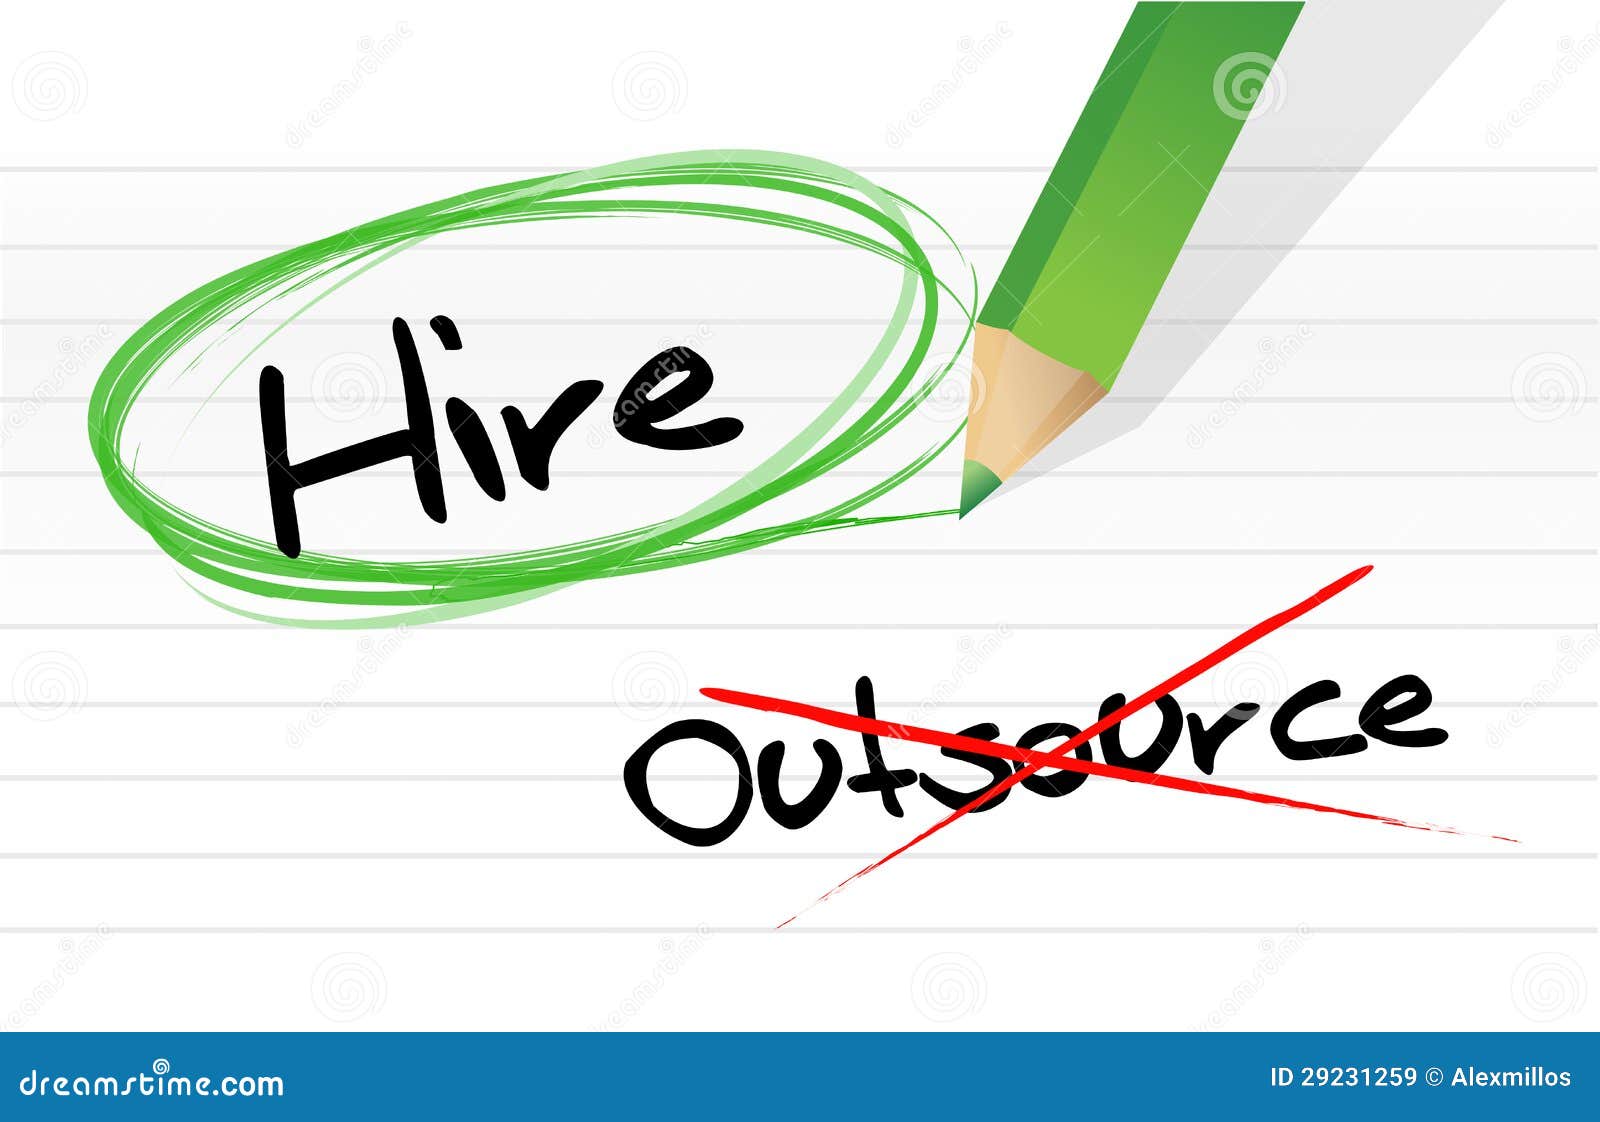 choosing to hire instead of outsource